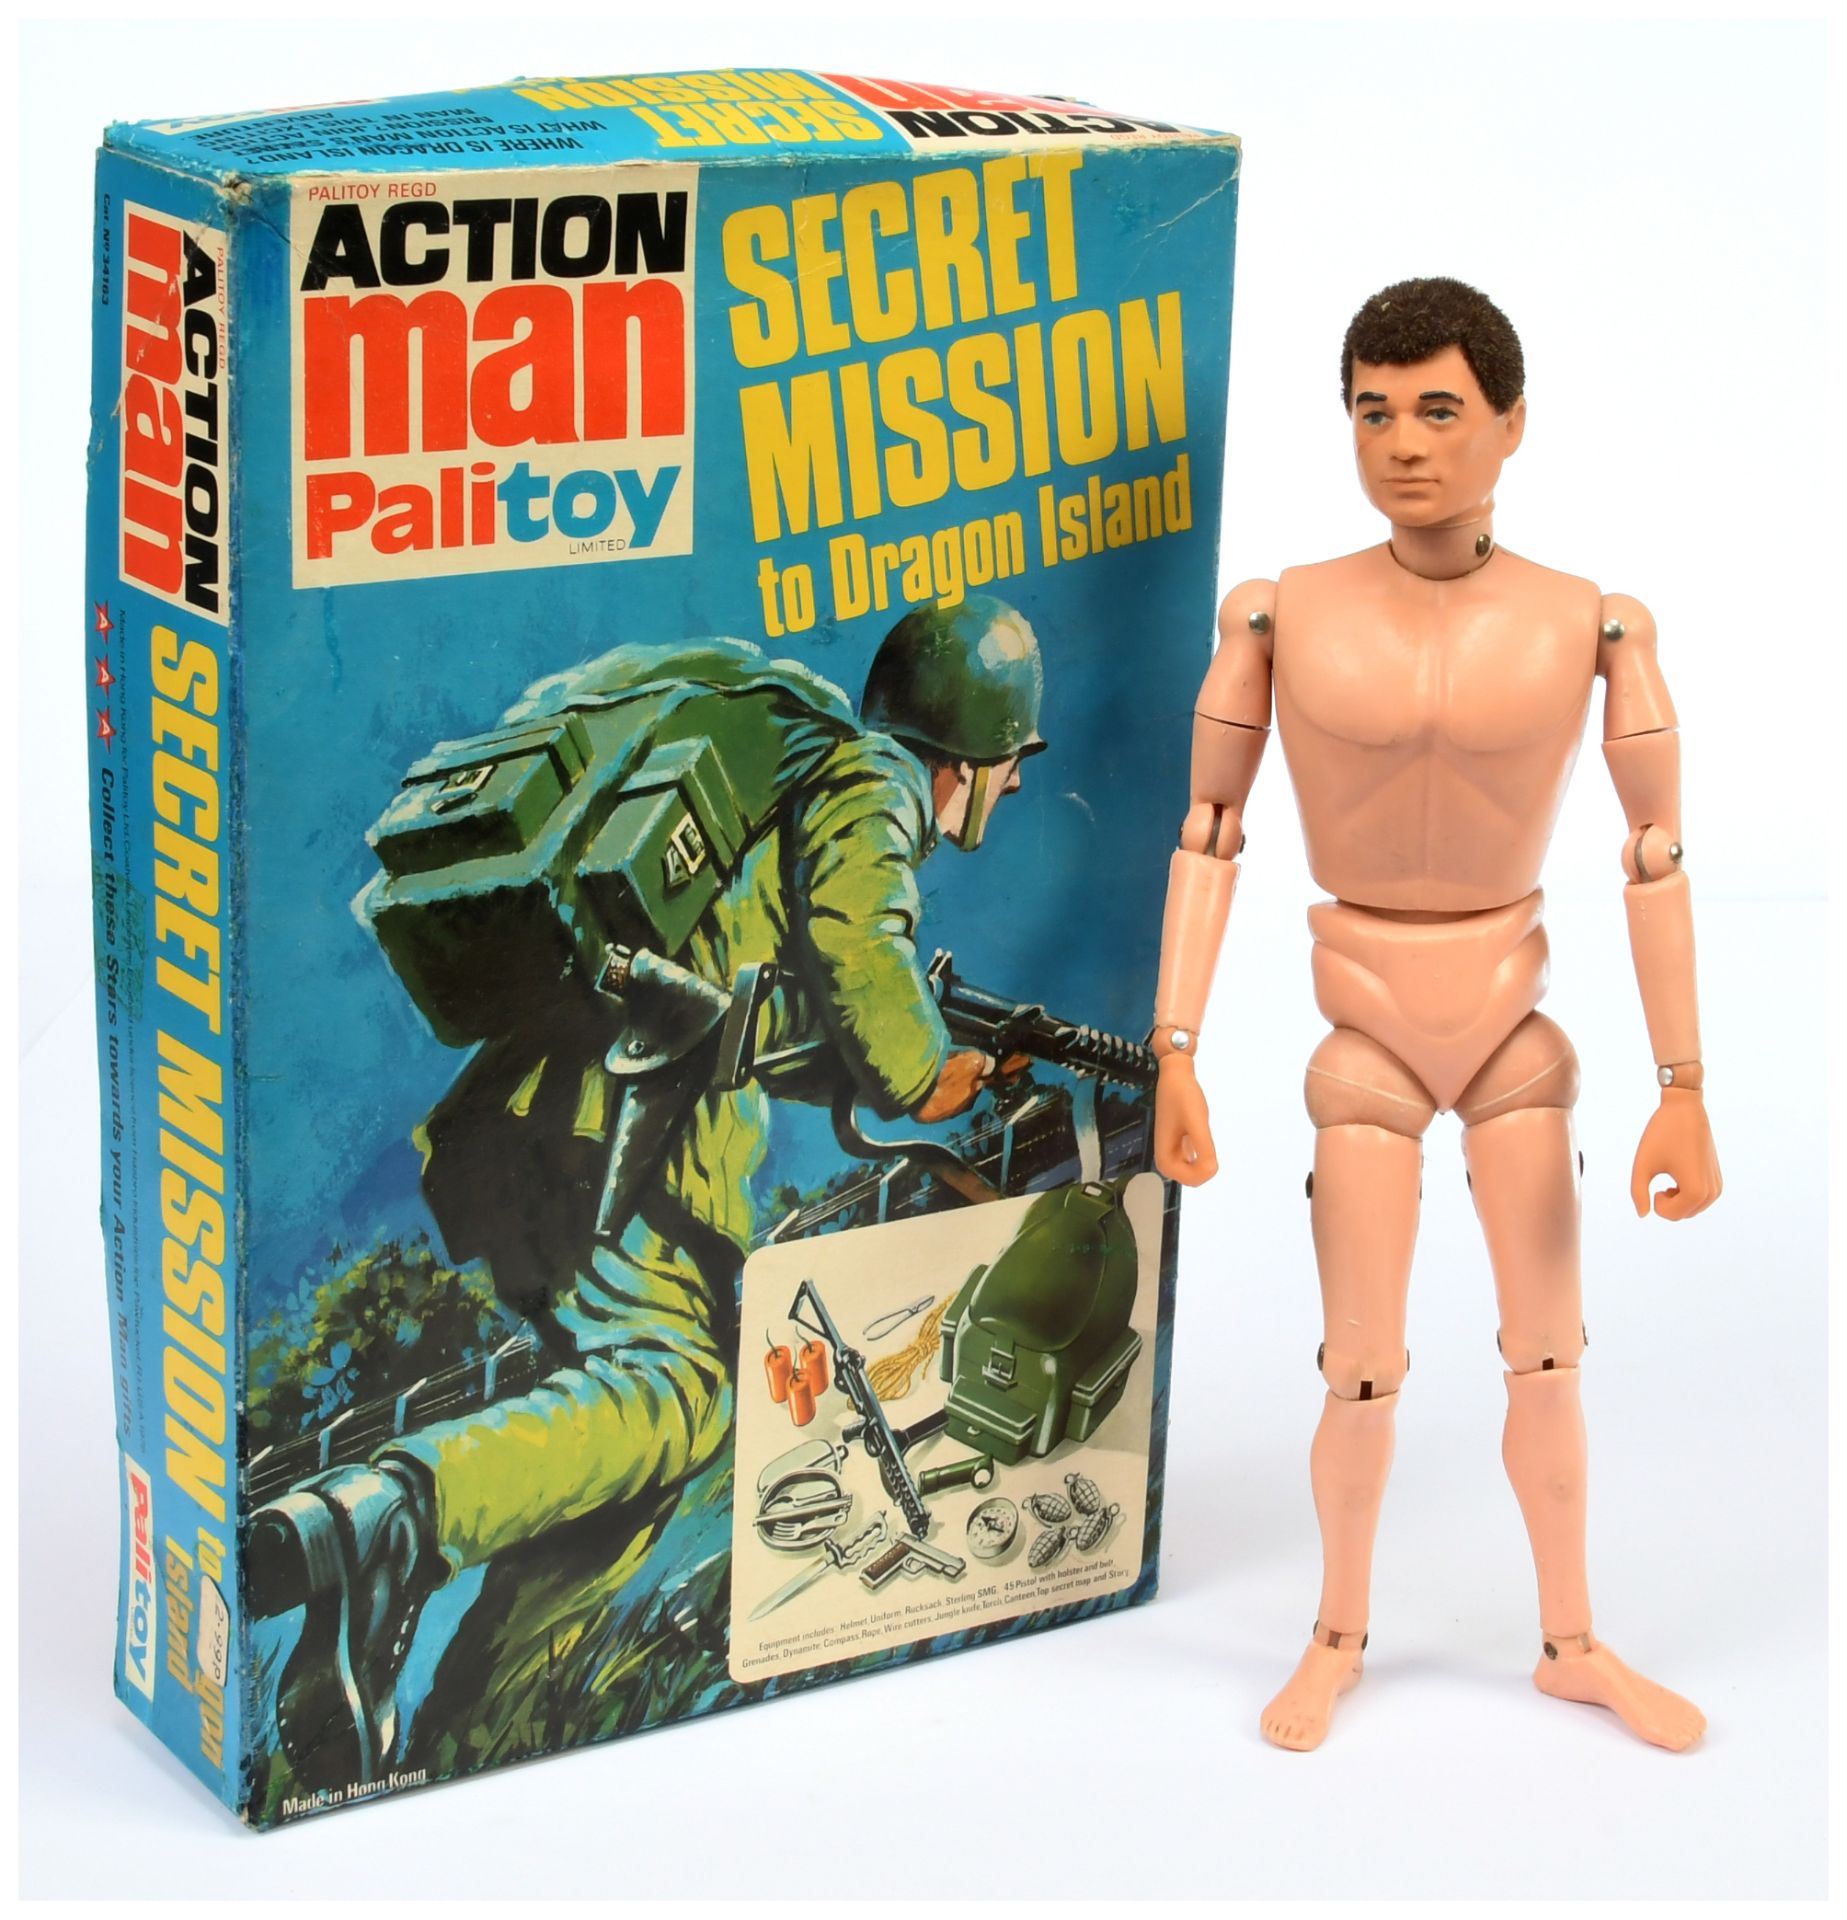 Palitoy Action Man Vintage 34163 Secret Mission to Dragon Island, not checked for completeness, b...